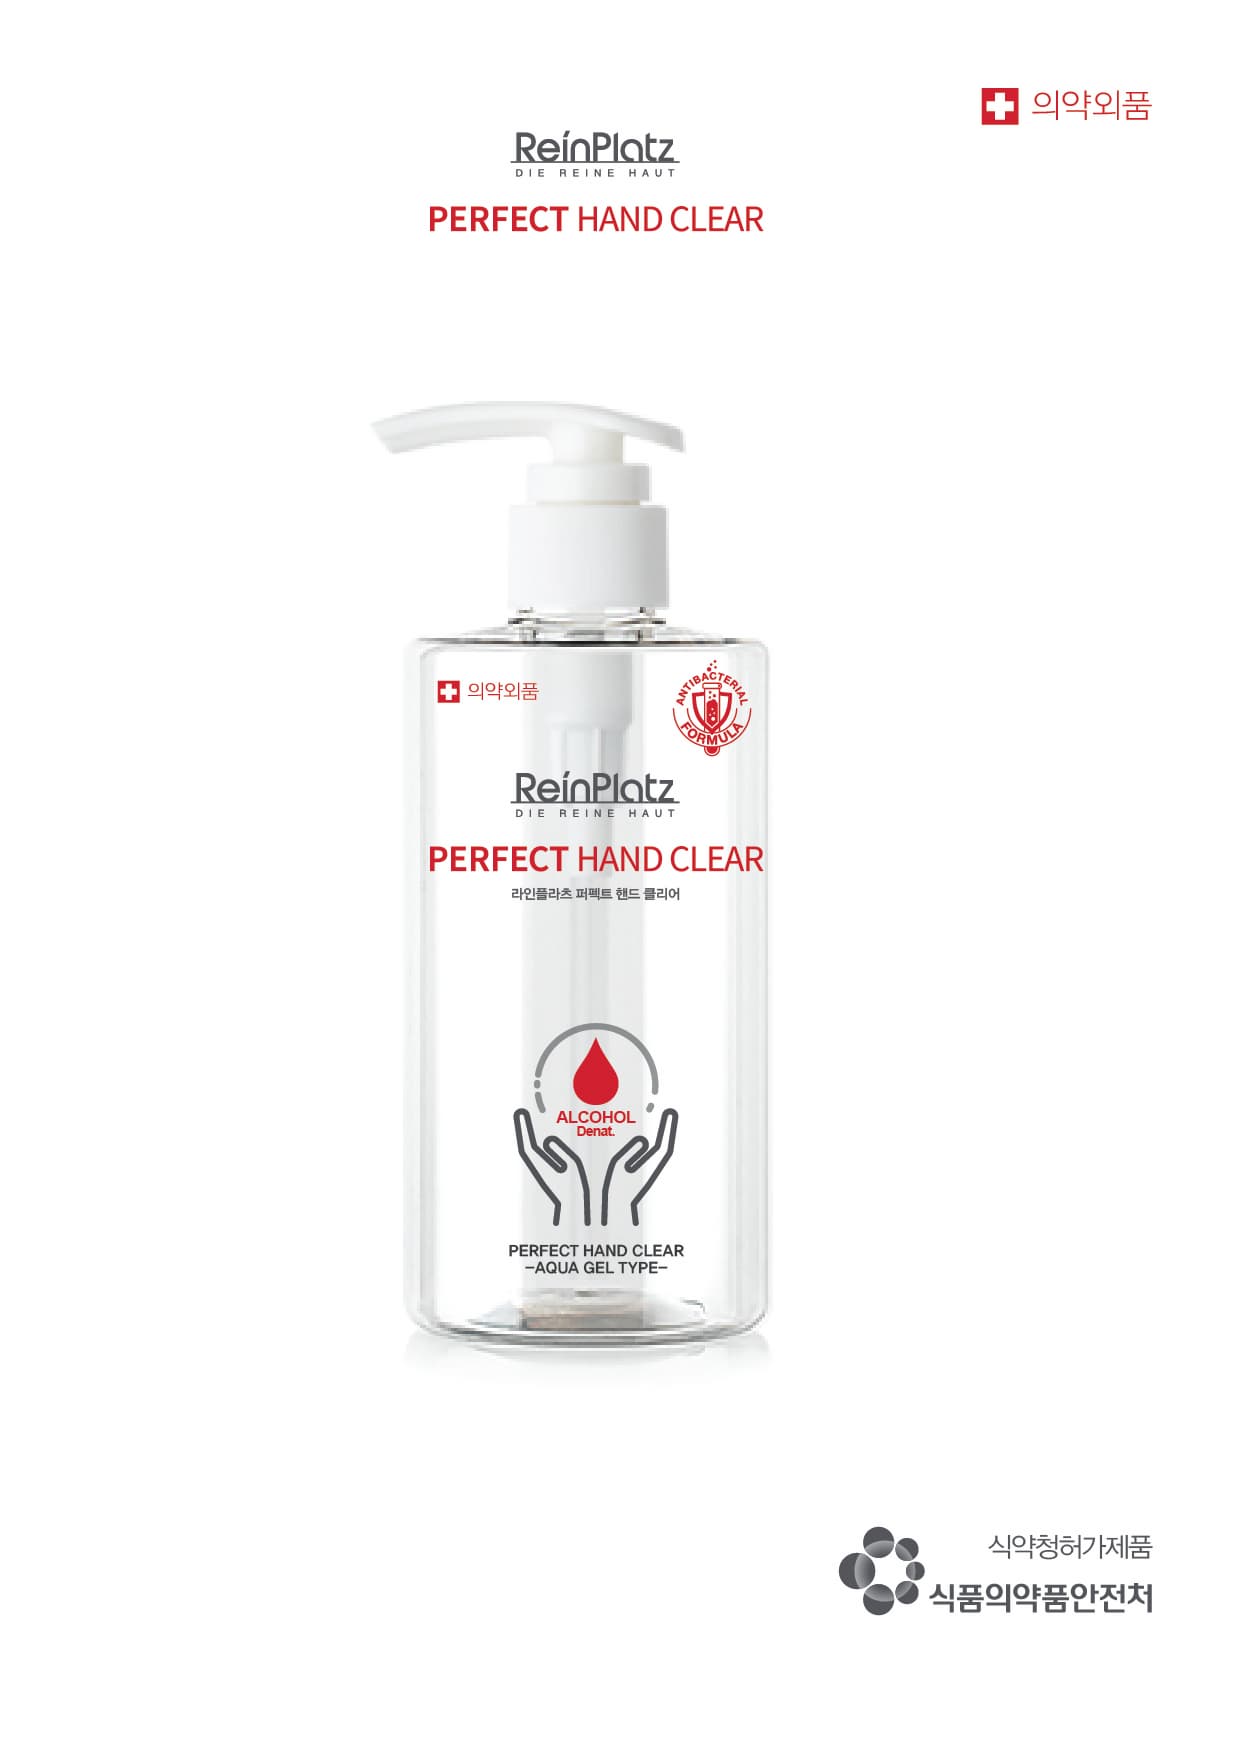 Perfect Hand Clear / Hand Sanitizer